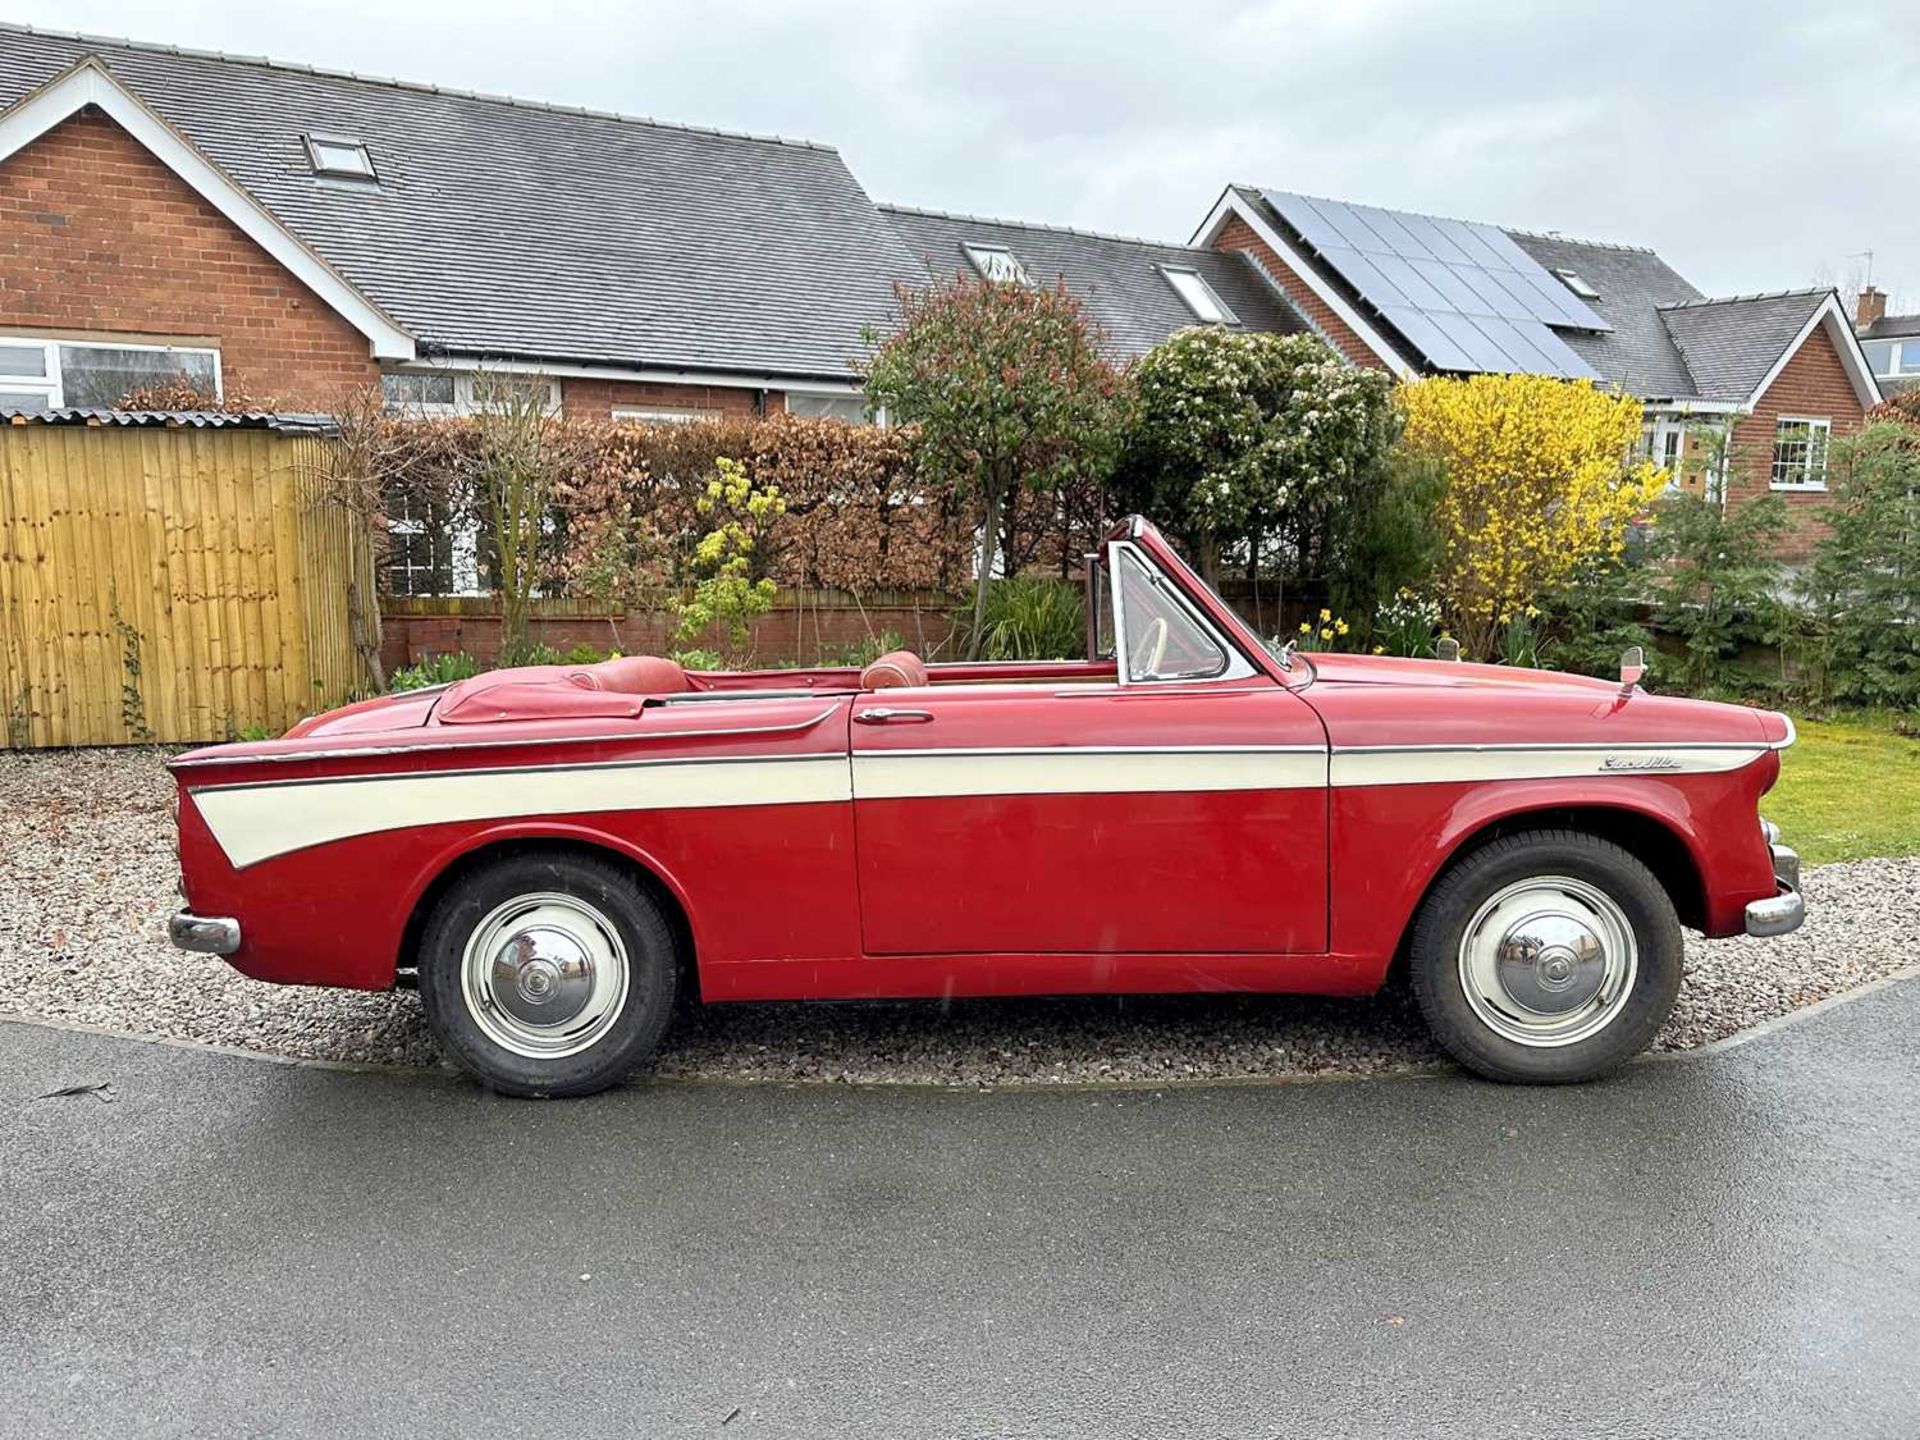 1961 Singer Gazelle Convertible Comes complete with overdrive, period radio and badge bar - Image 24 of 95